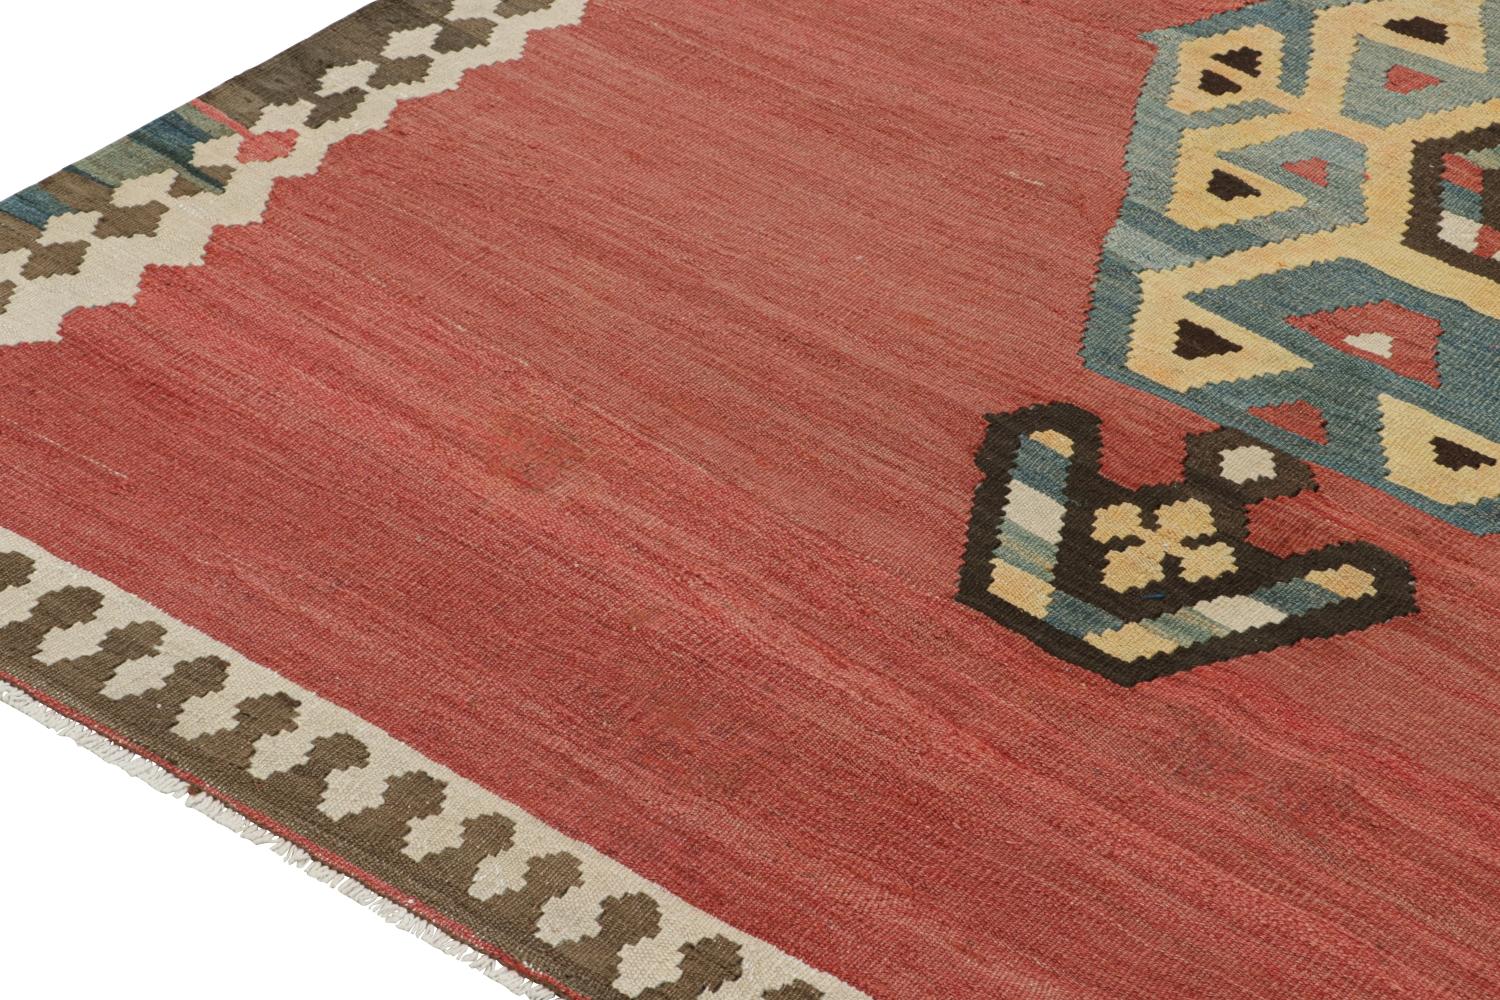 Mid-20th Century Vintage Shahsavan Persian Kilim in Red with Medallion Patterns For Sale